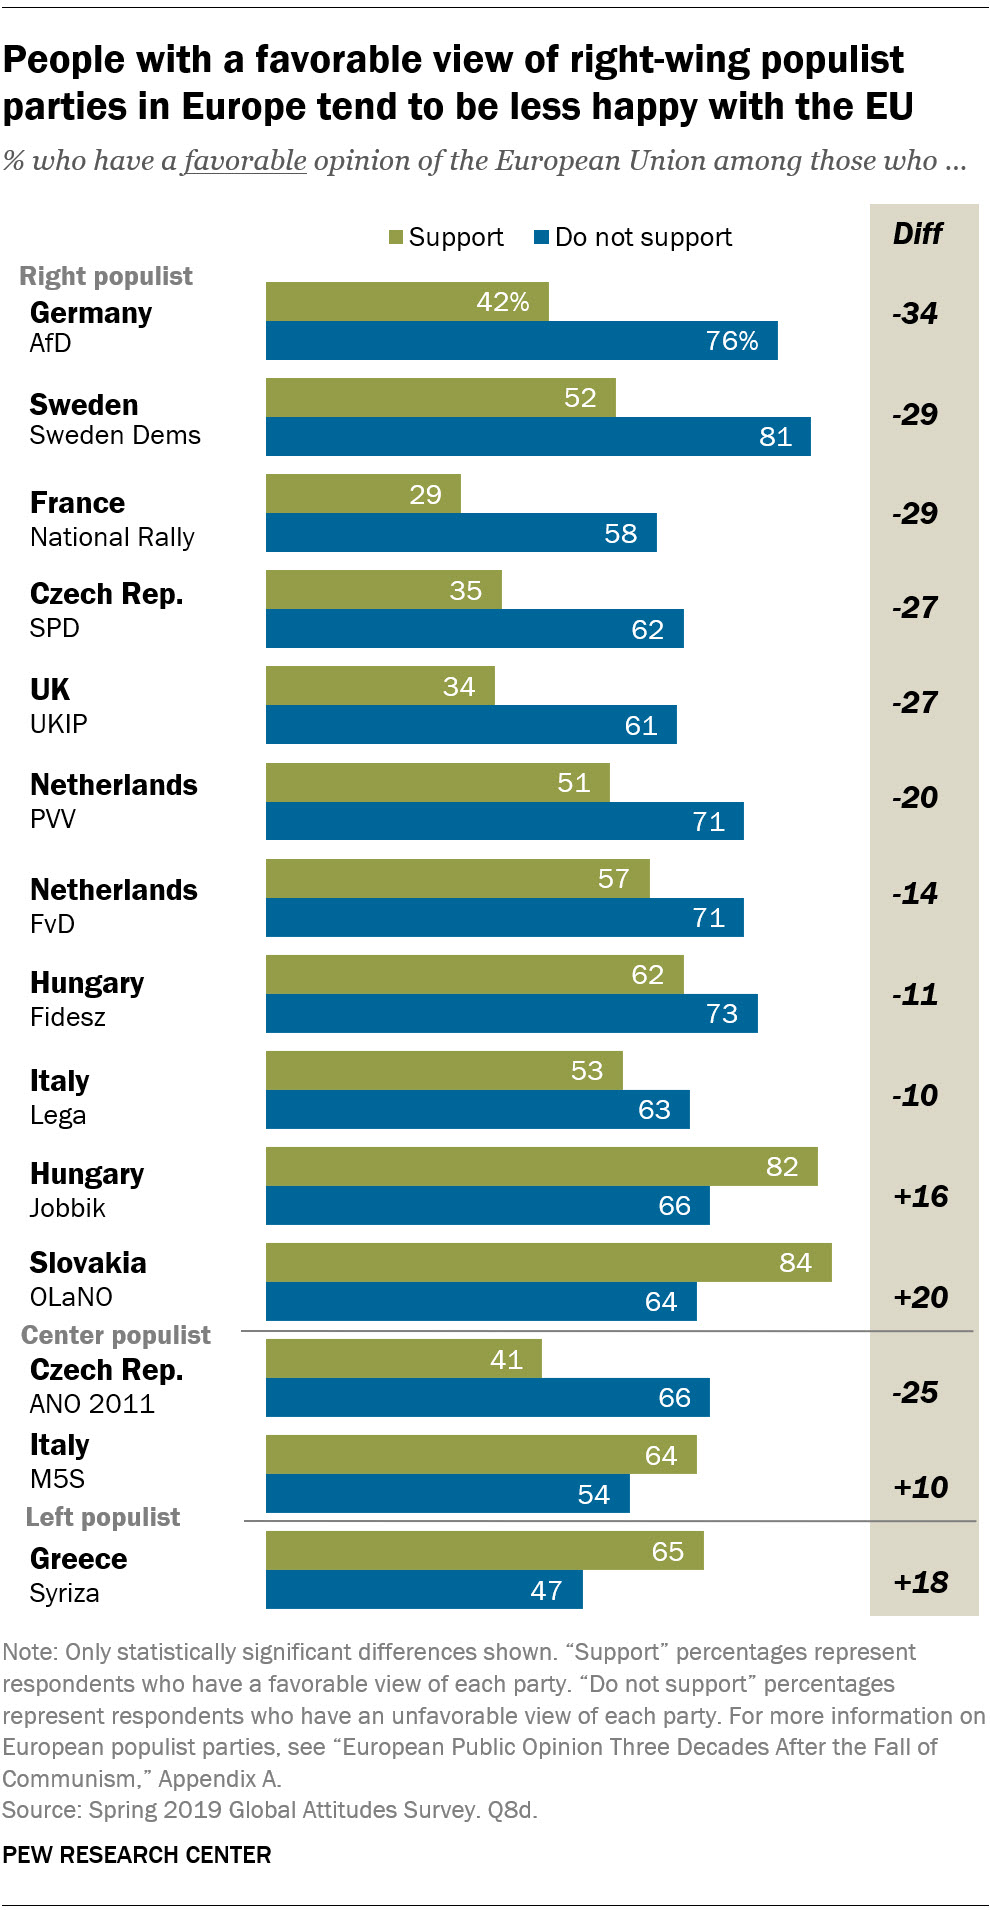 People with a favorable view of right-wing populist parties in Europe tend to be less happy with the EU